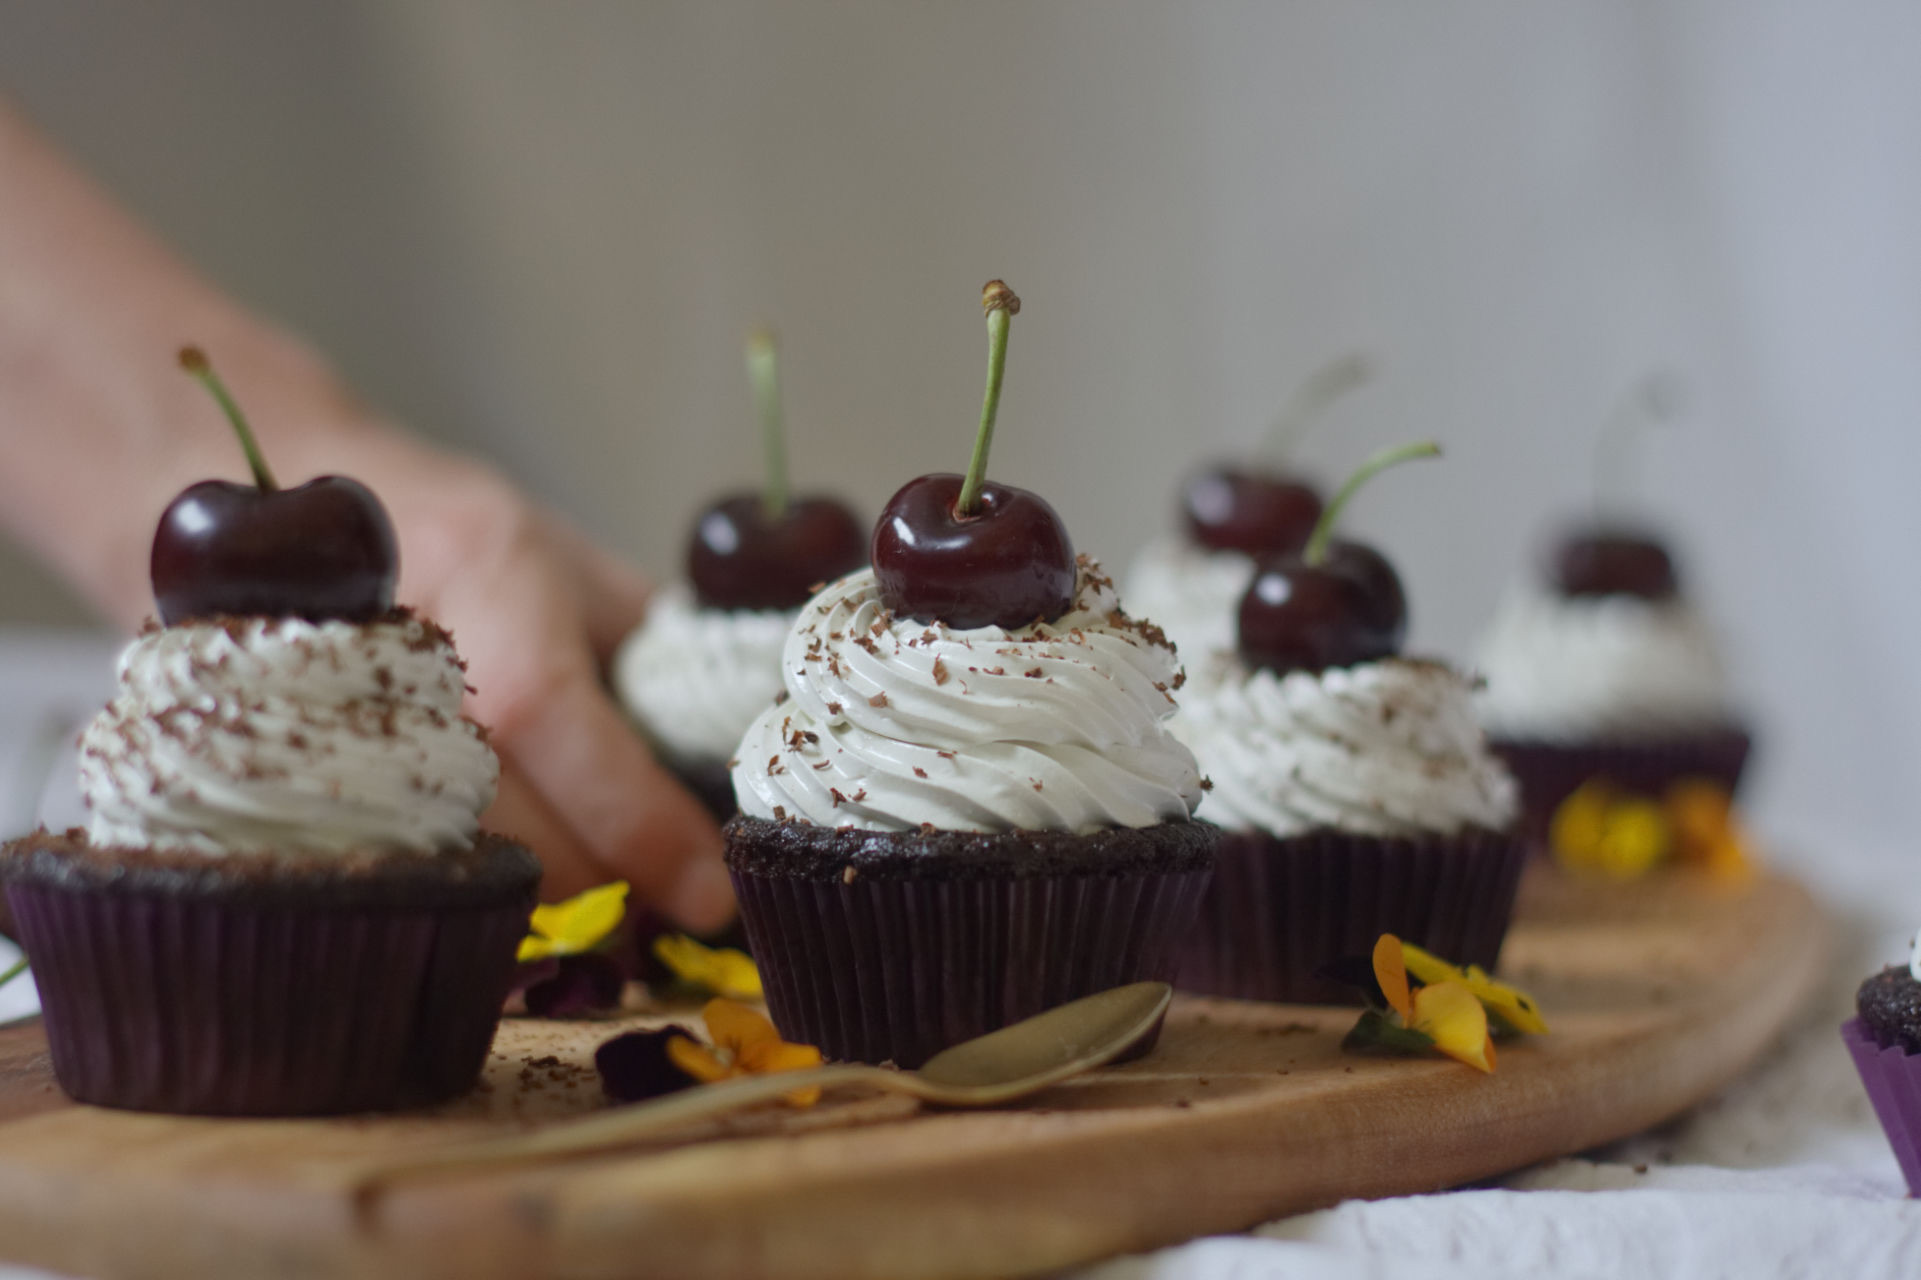 image from Cupcakes “Selva Negra”